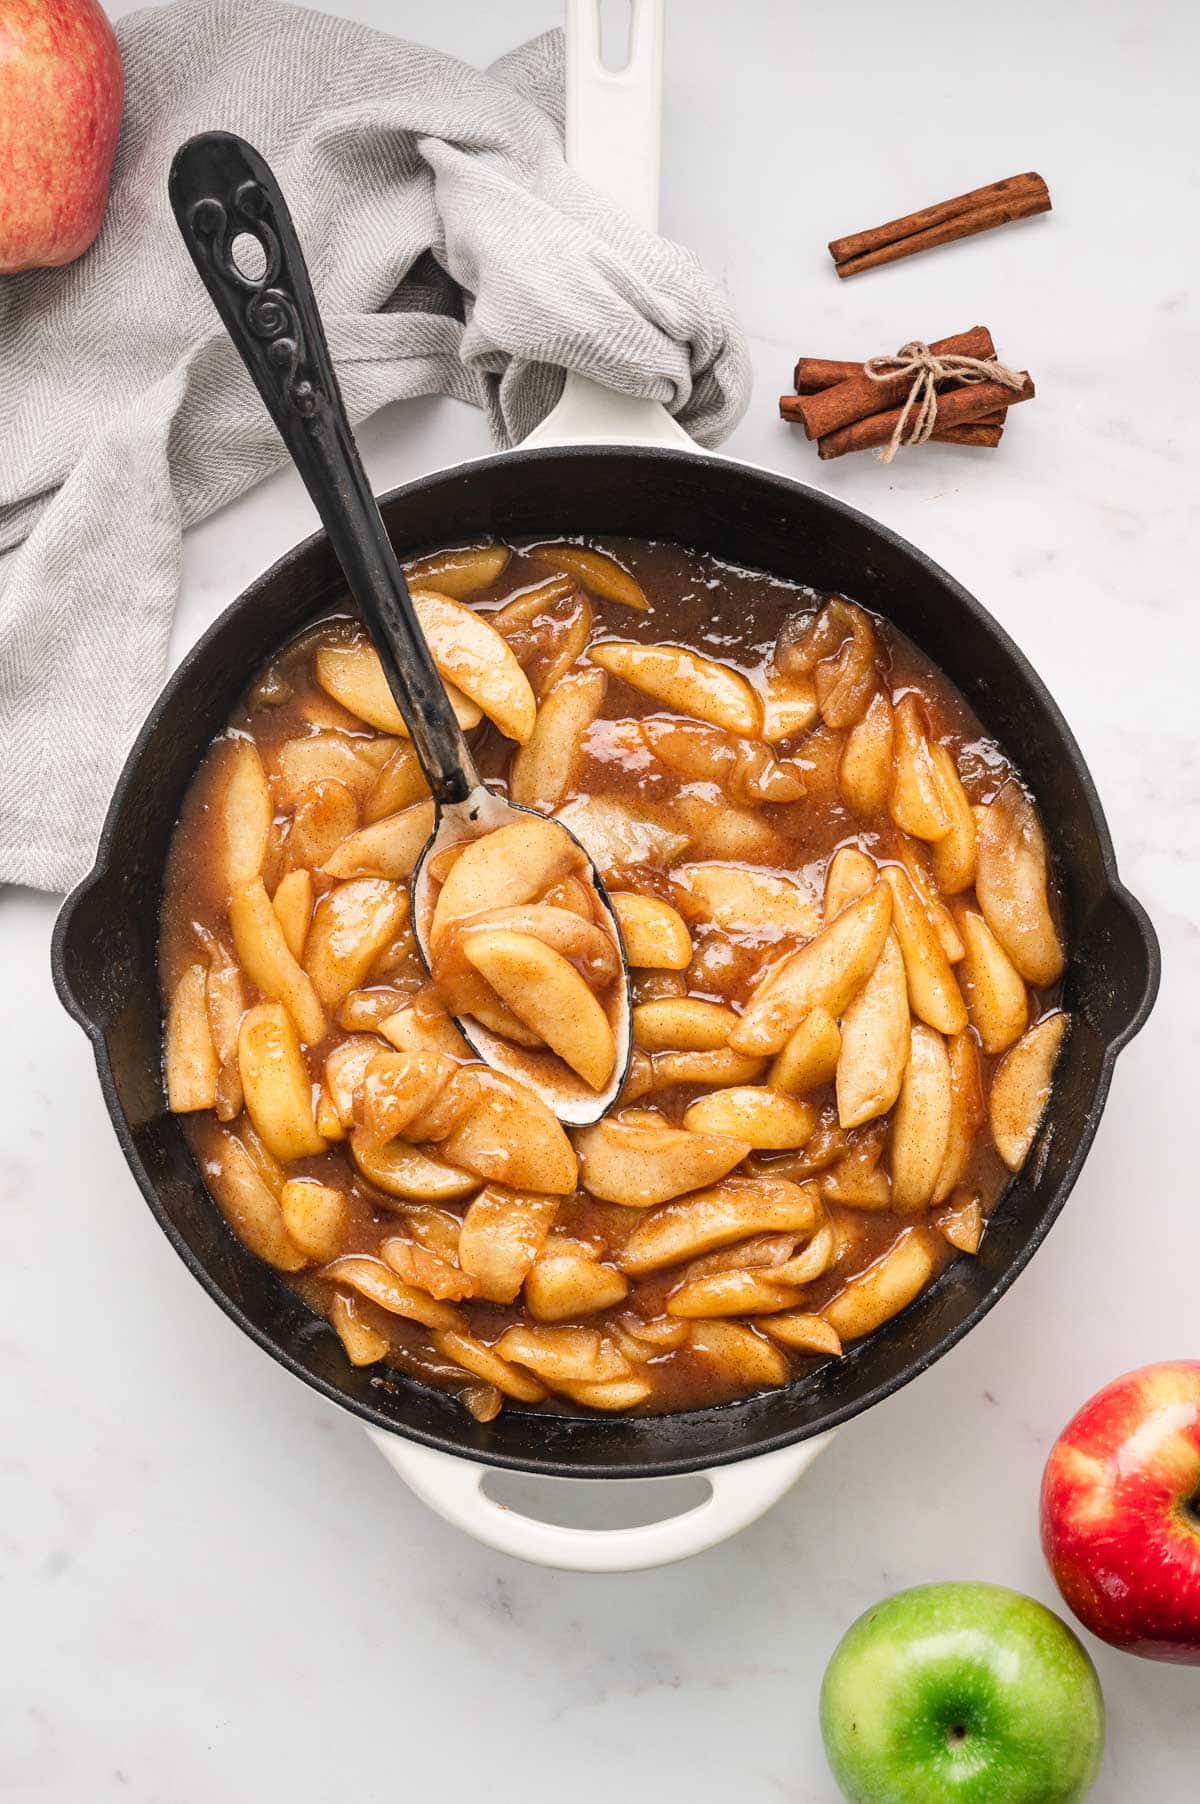 Fried apples in a large skillet with a serving spoon.